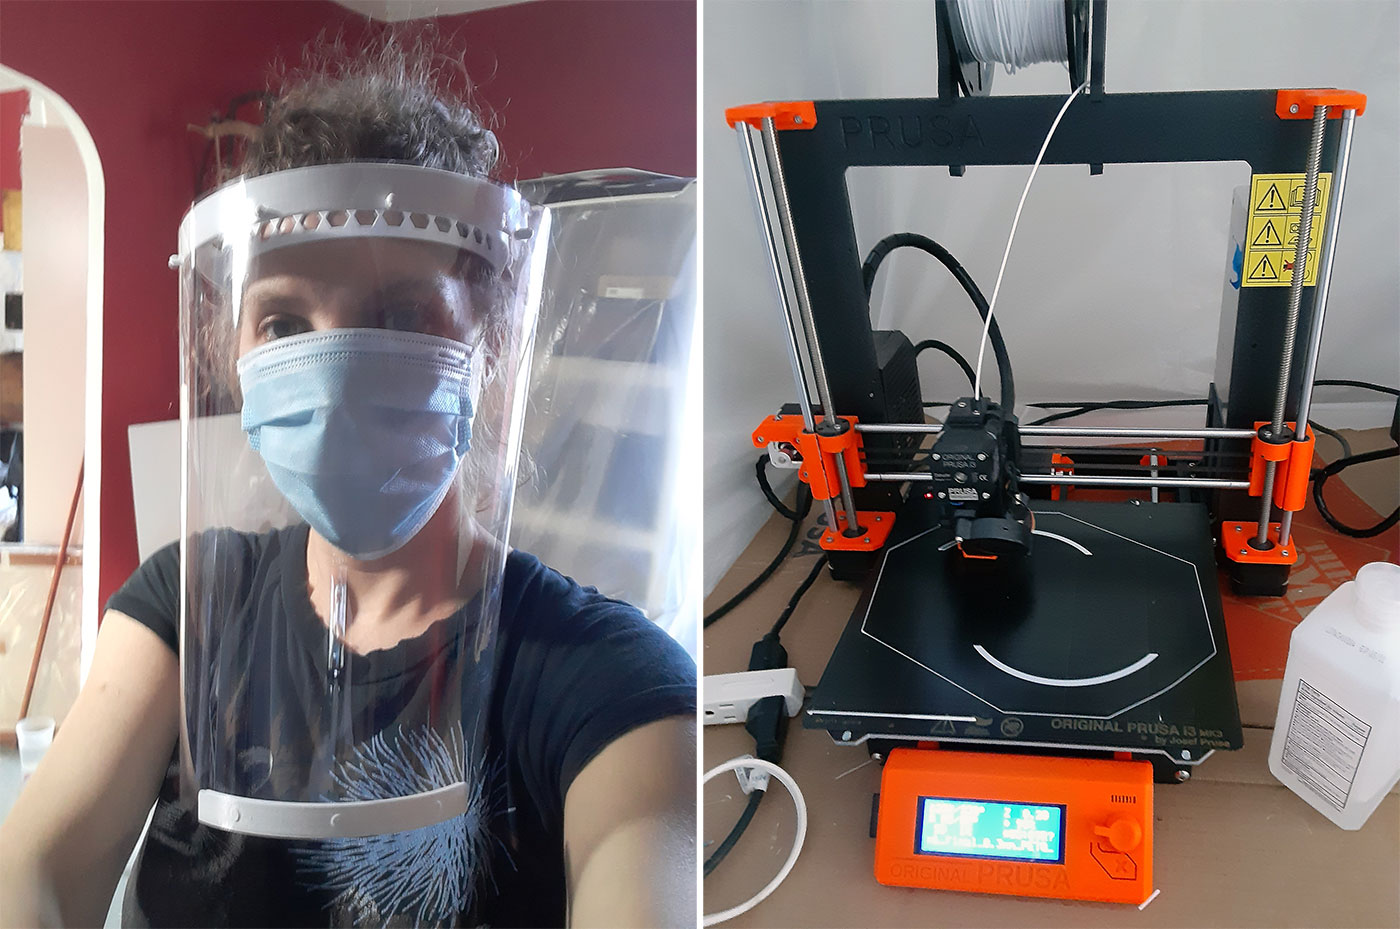 Luba Drozd, BFA Computer Graphics '06, making face shields with the 3D printer in her apartment (courtesy Luba Drozd)